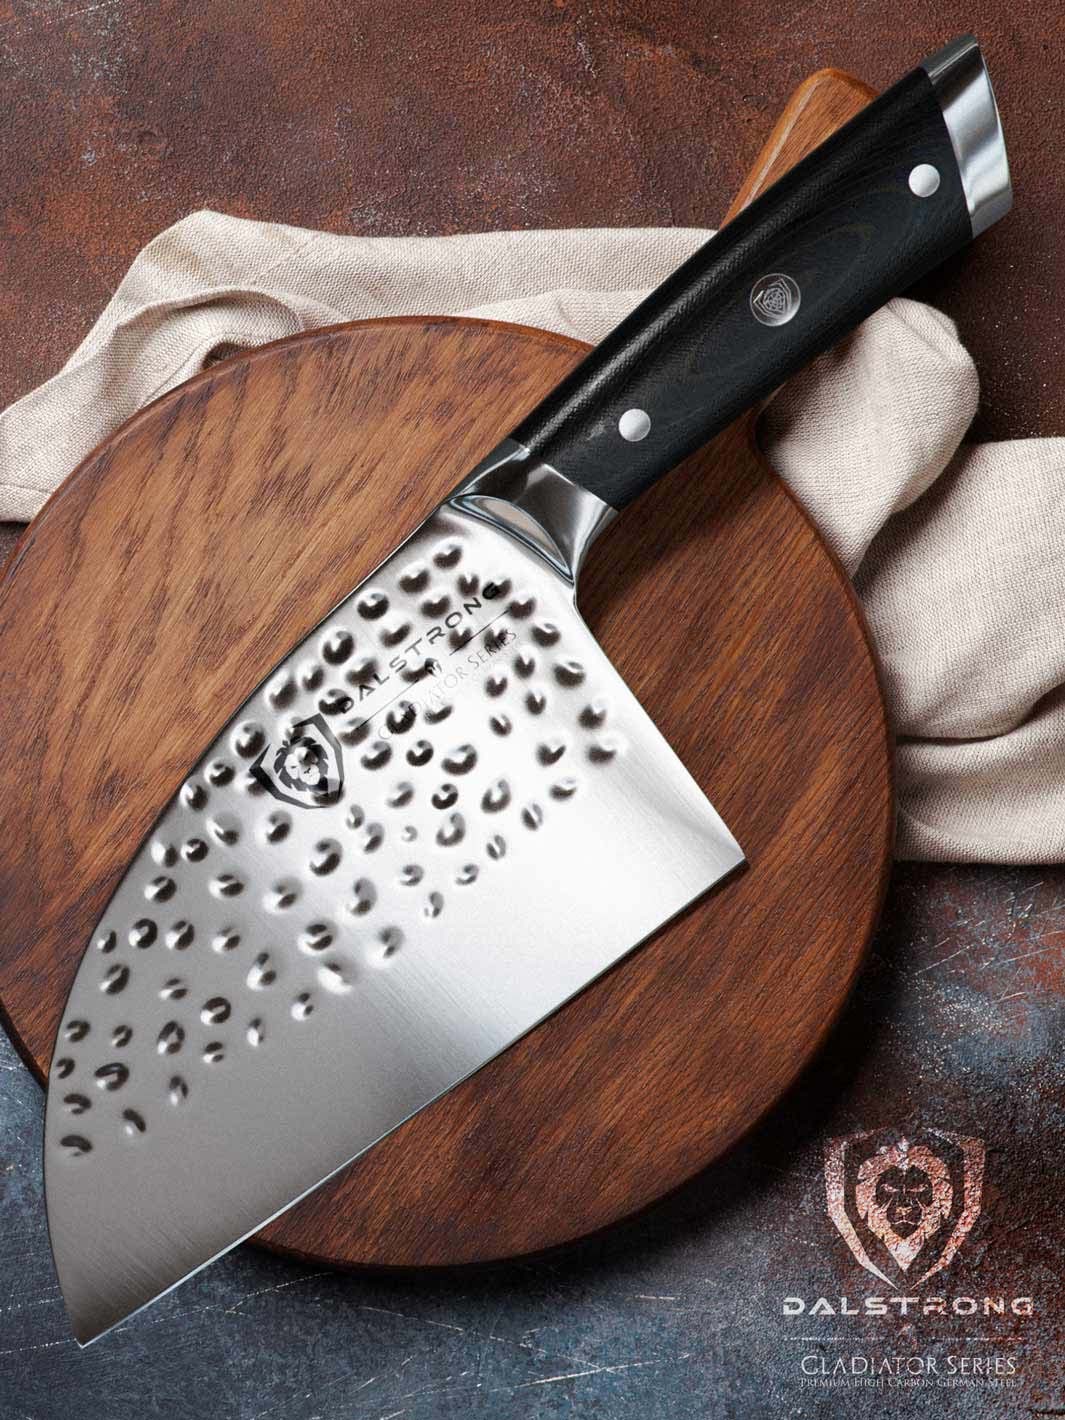 Save 75% on DALSTRONG Gladiator Series Colossal Knife Set on !, Recent News